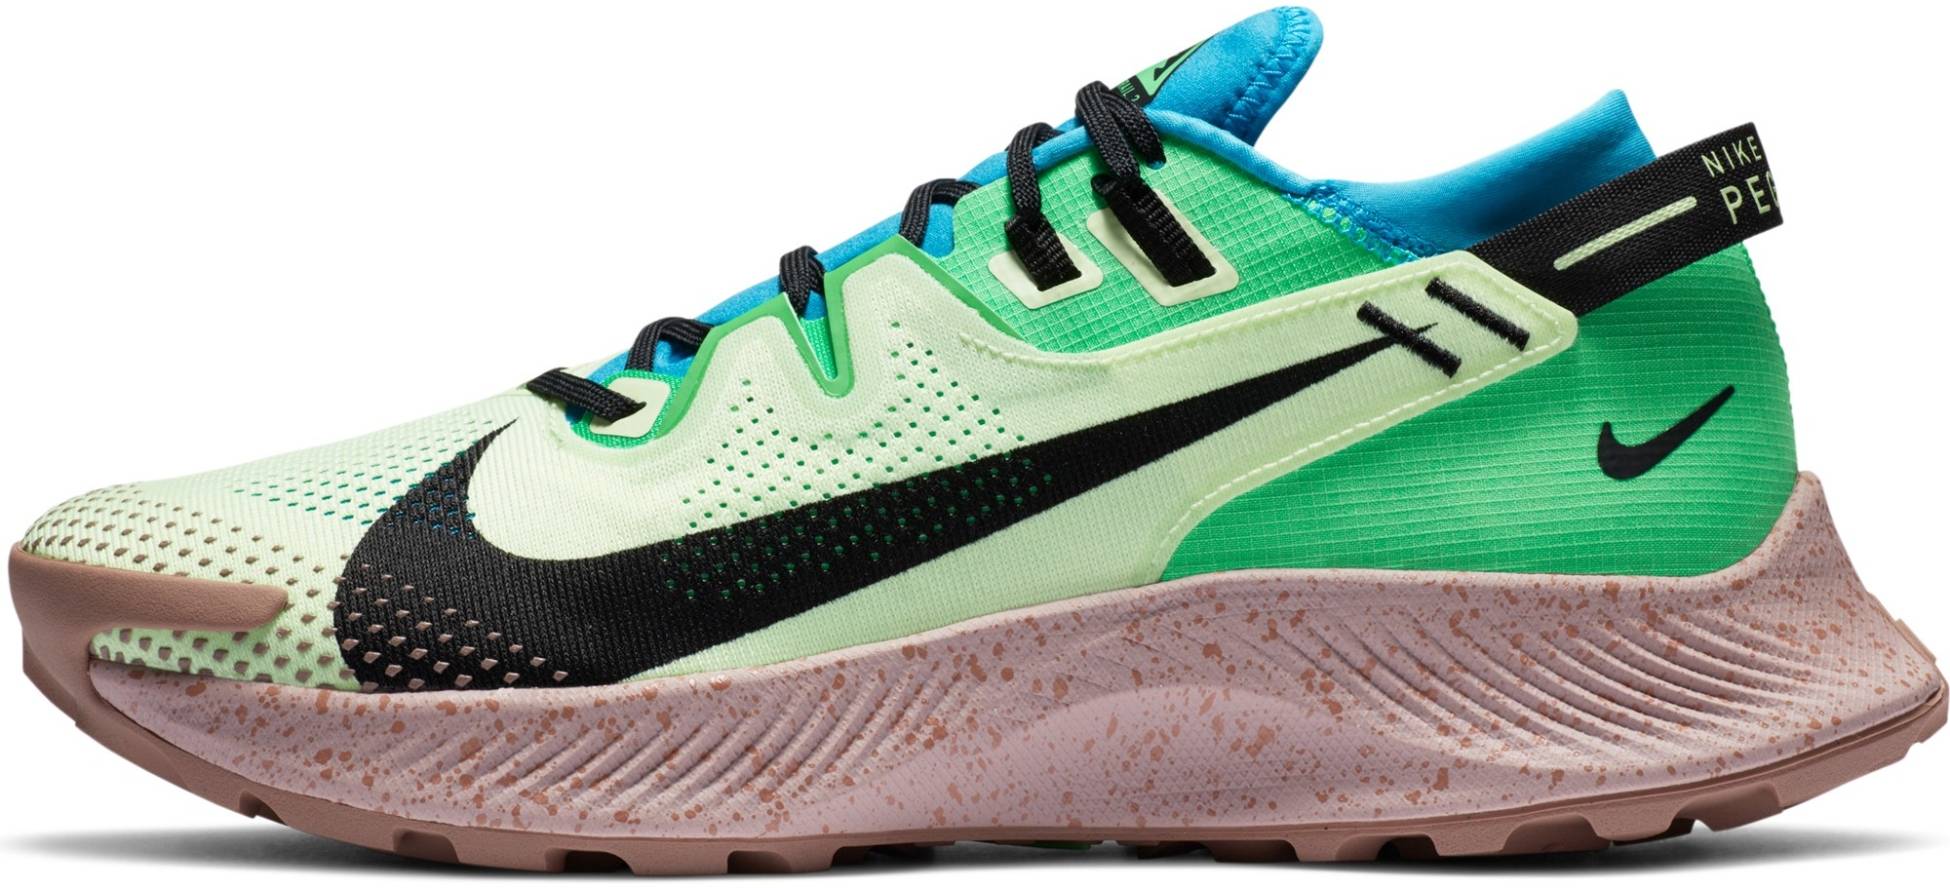 green trail running shoes